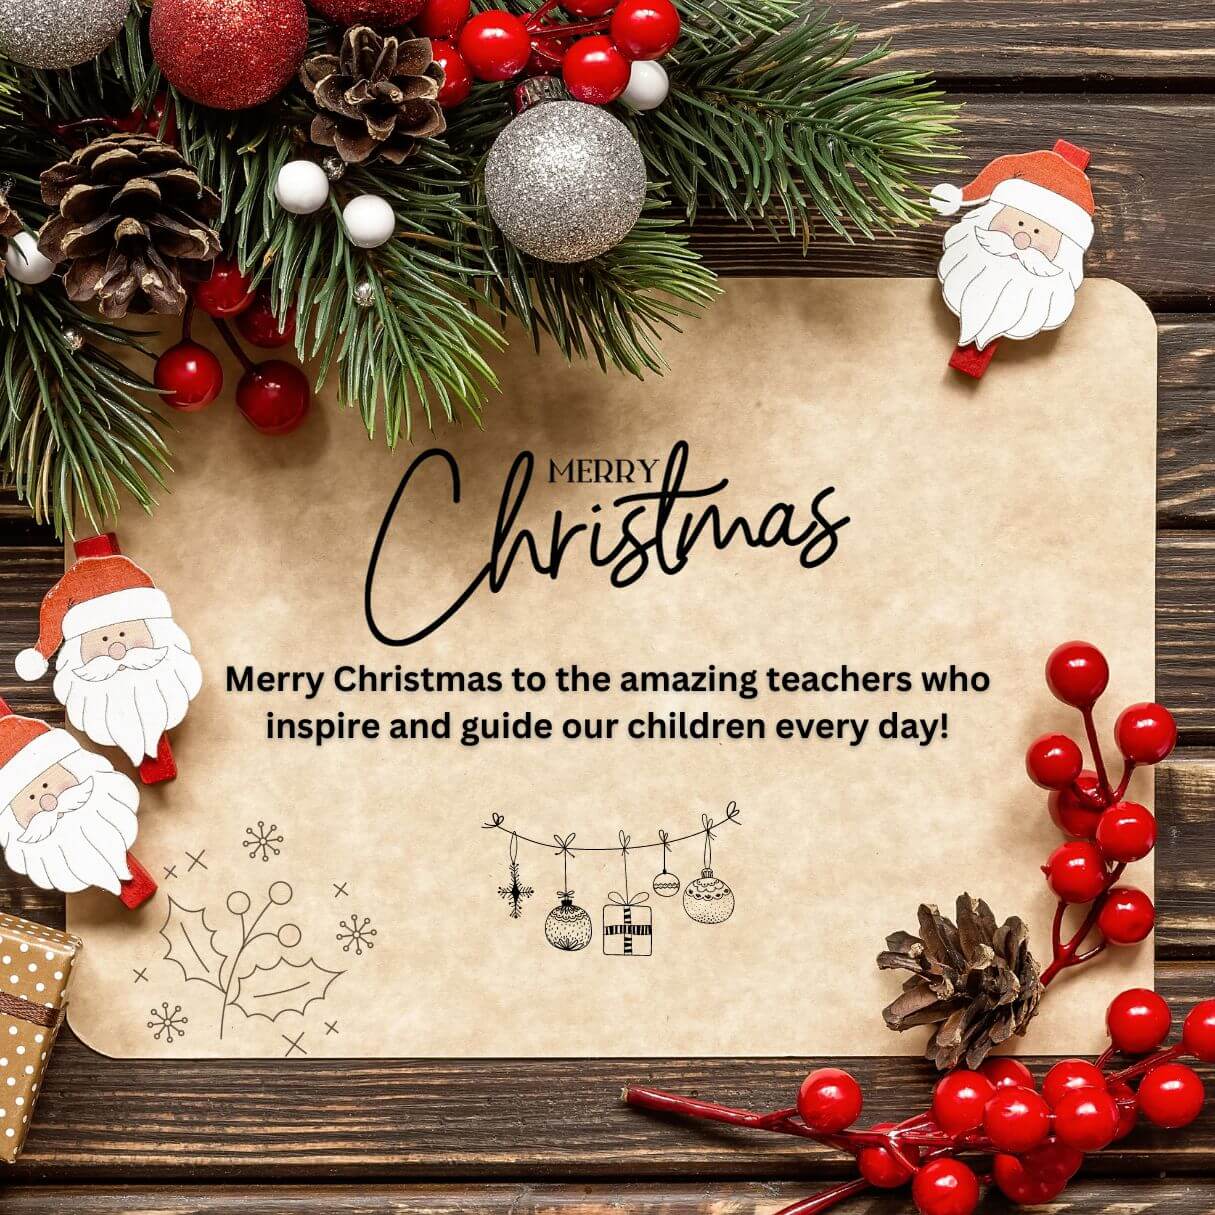 Merry Christmas Messages For Teachers From Parents